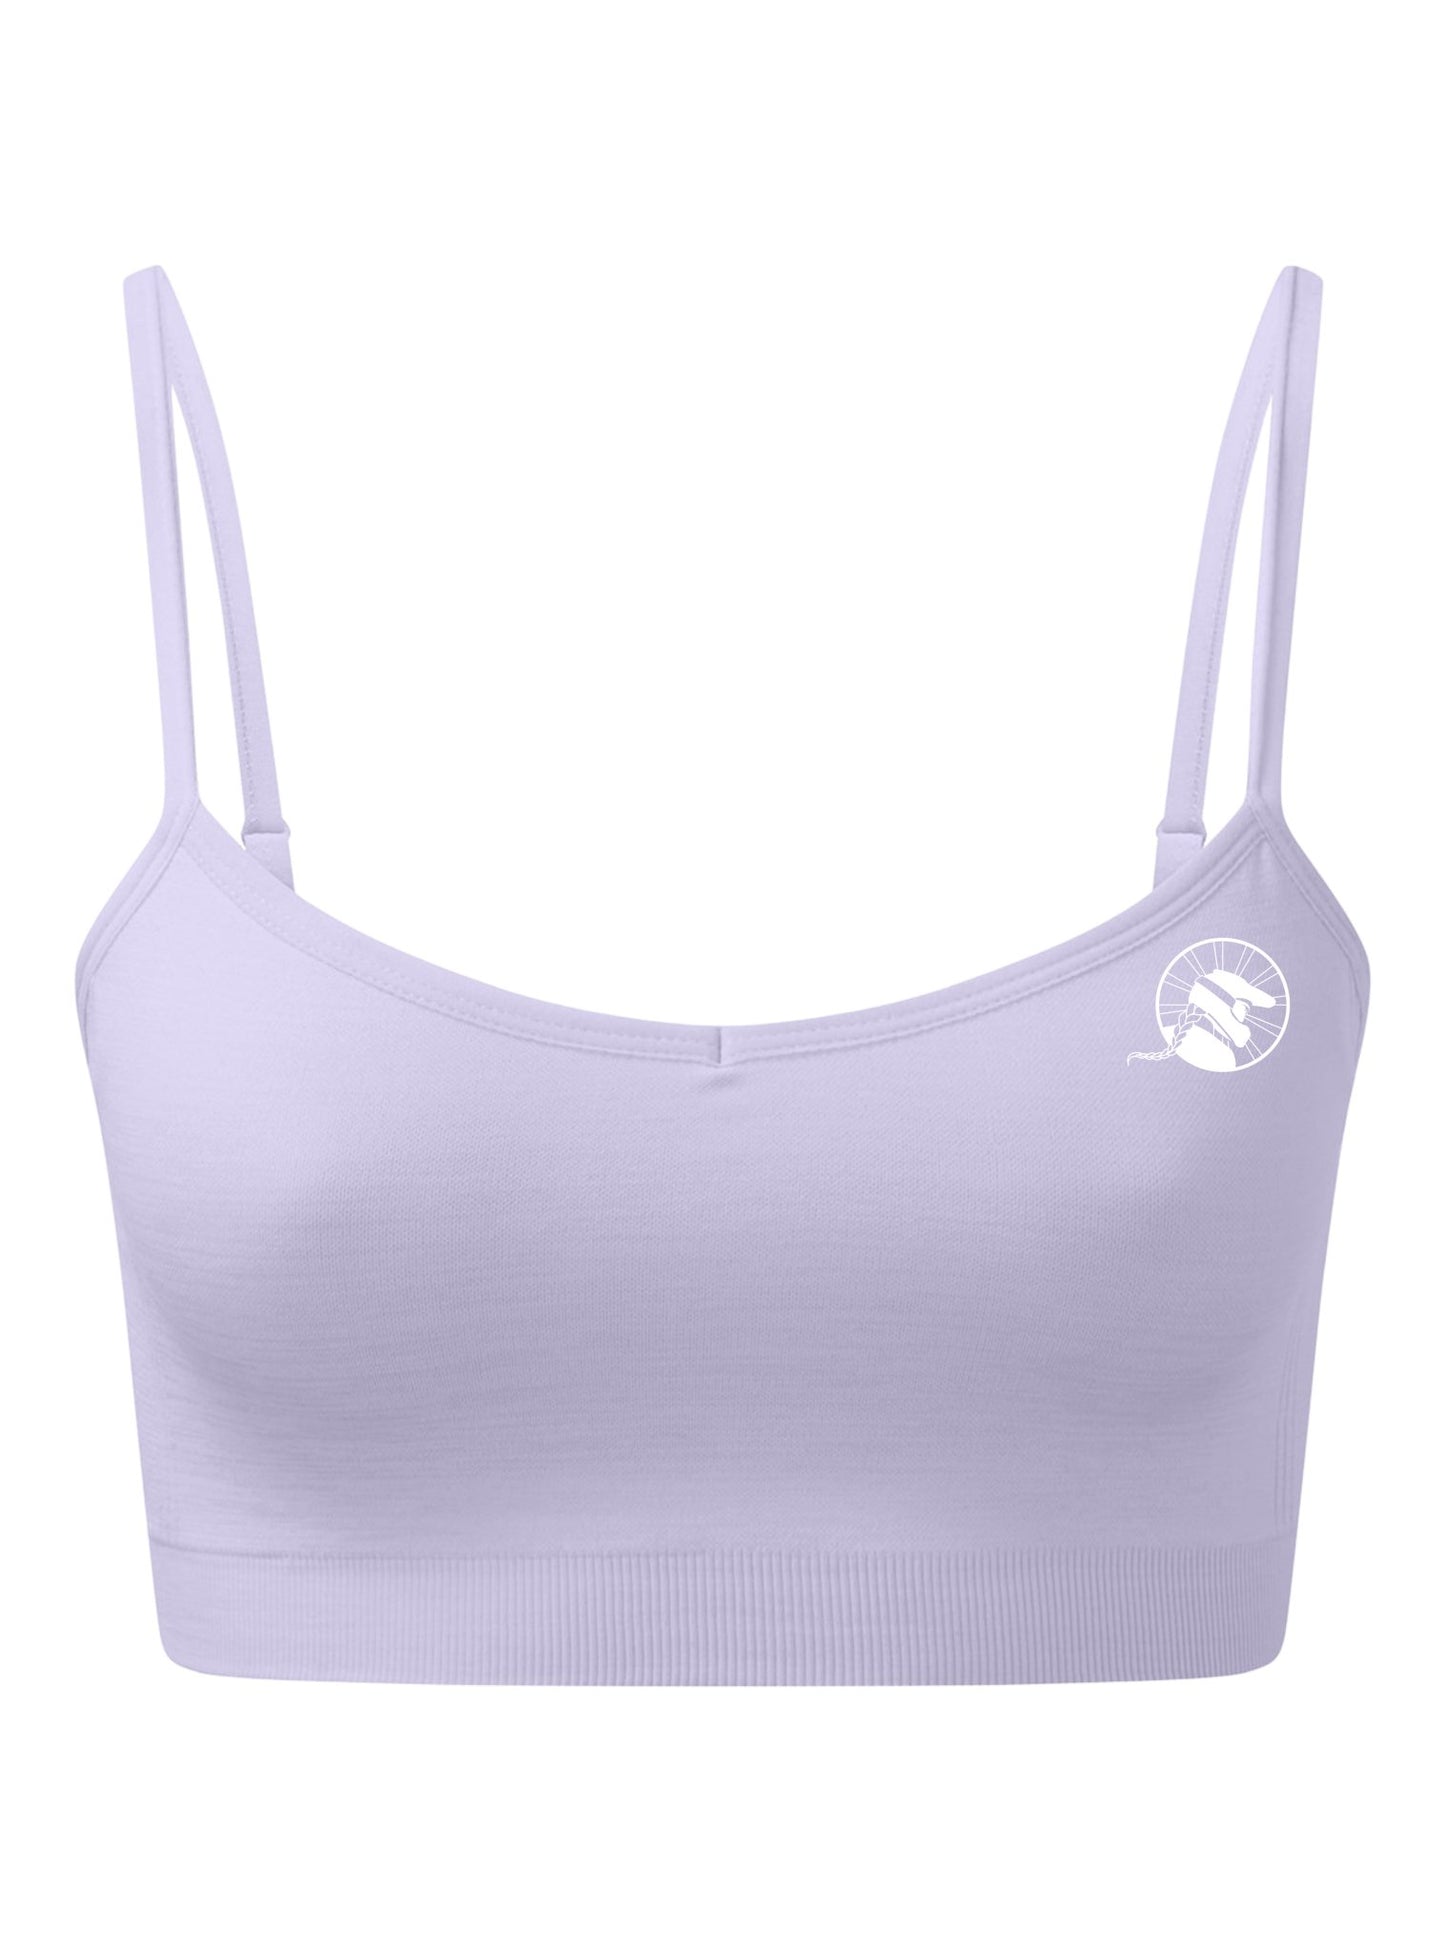 Sports Bra Light Support | Lilac - Shred Like a Girl